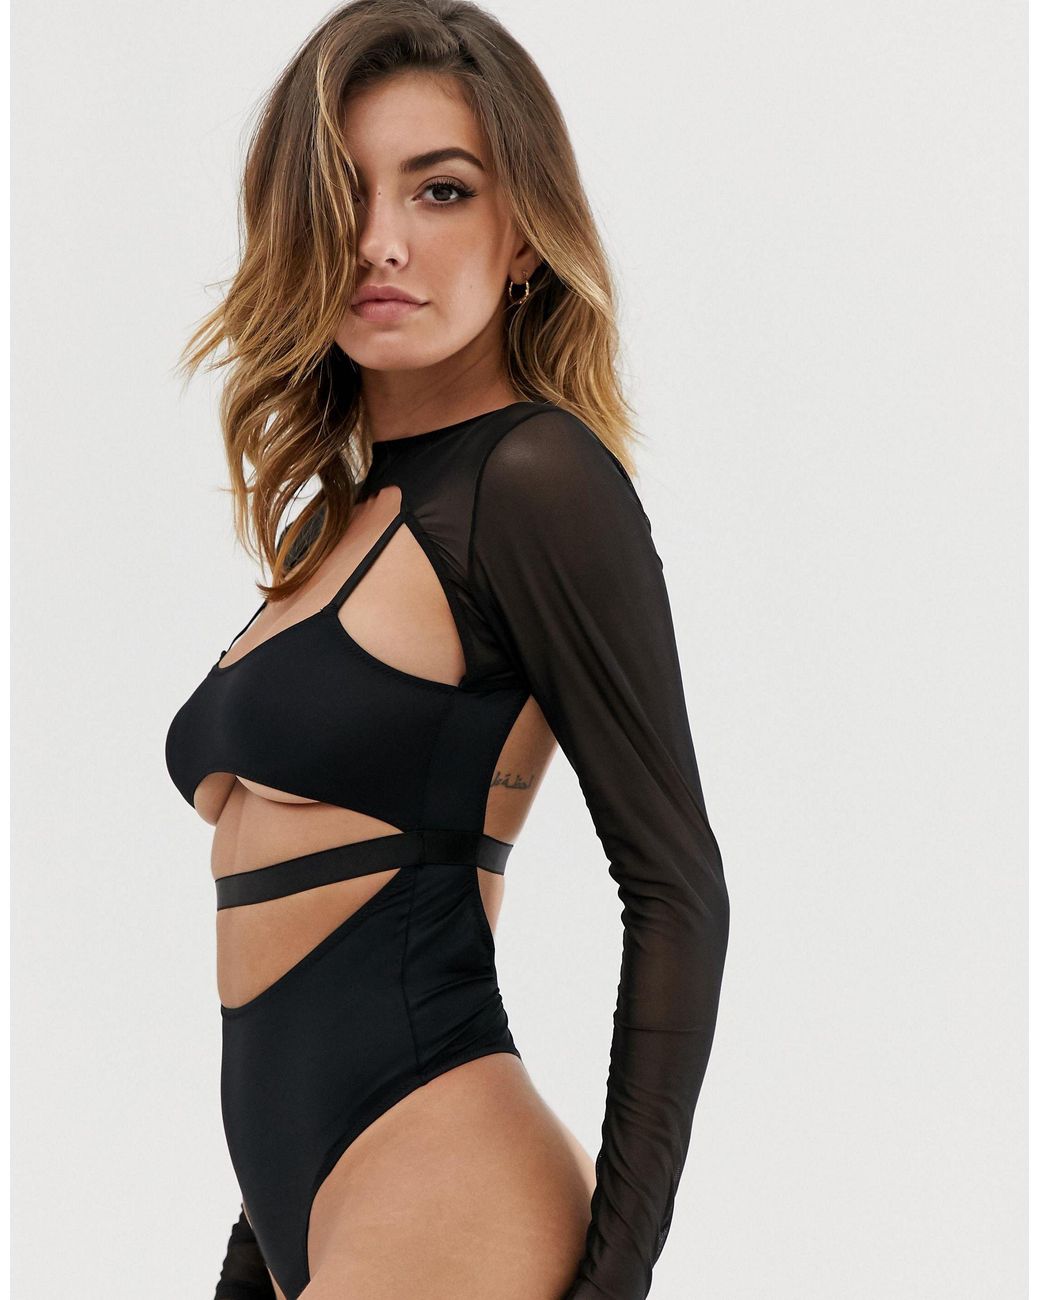 ASOS Louanna Long Sleeve Mesh Cut Out Strappy Bodysuit in Black